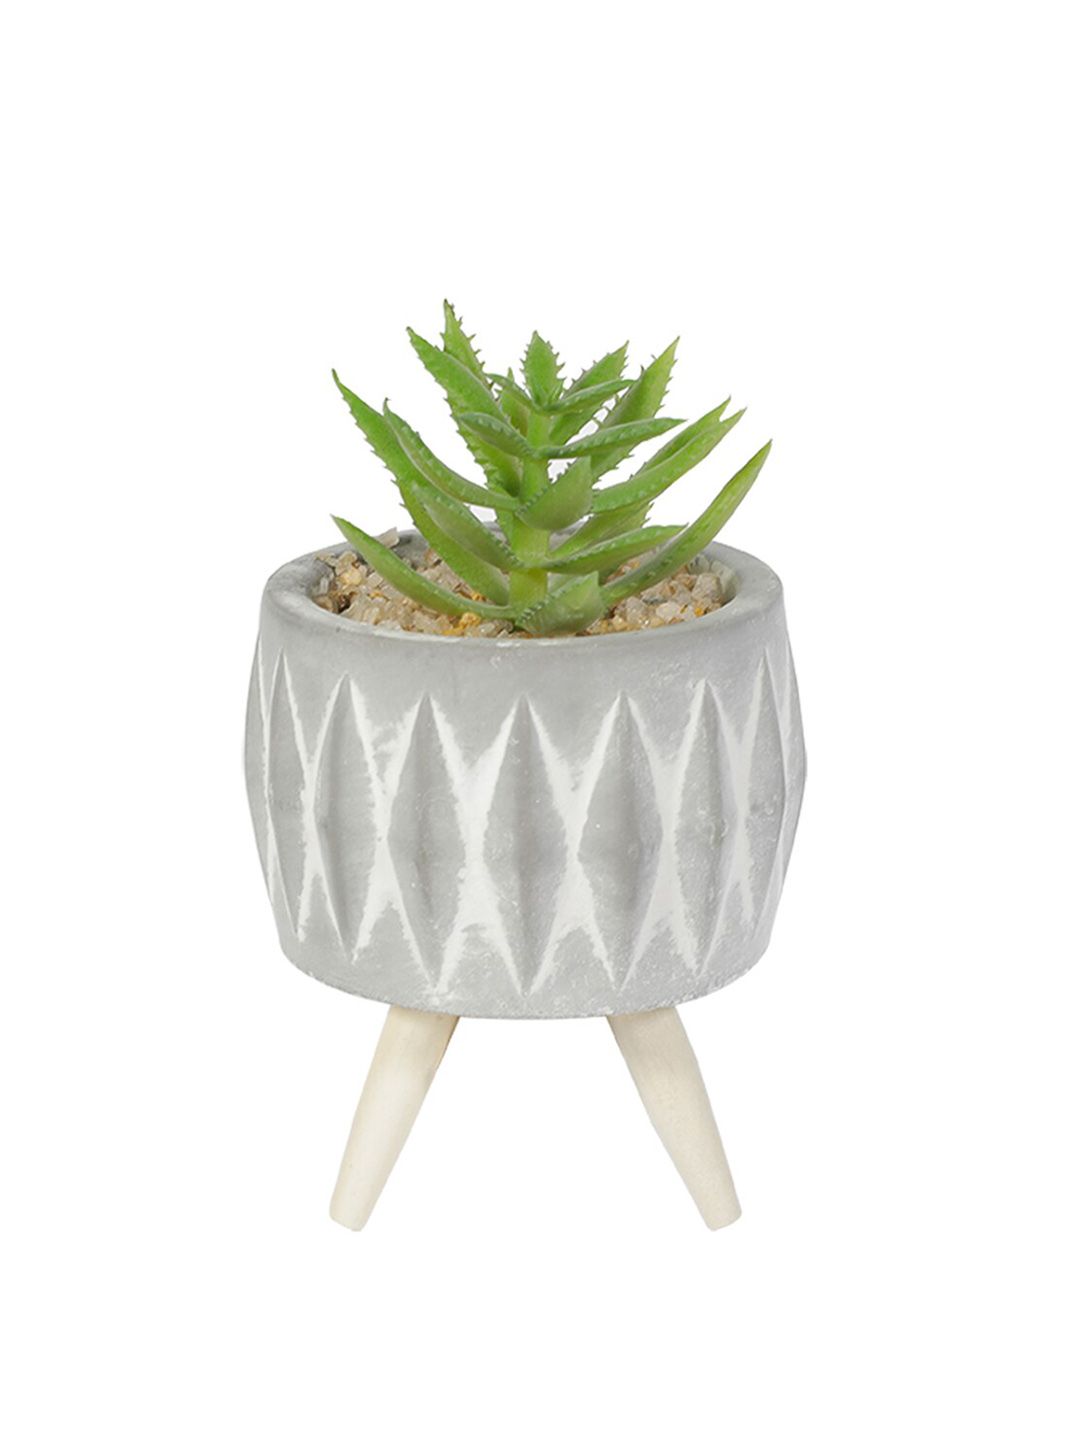 MARKET99 Grey Succulent Plant With Pot Holder Stand Price in India